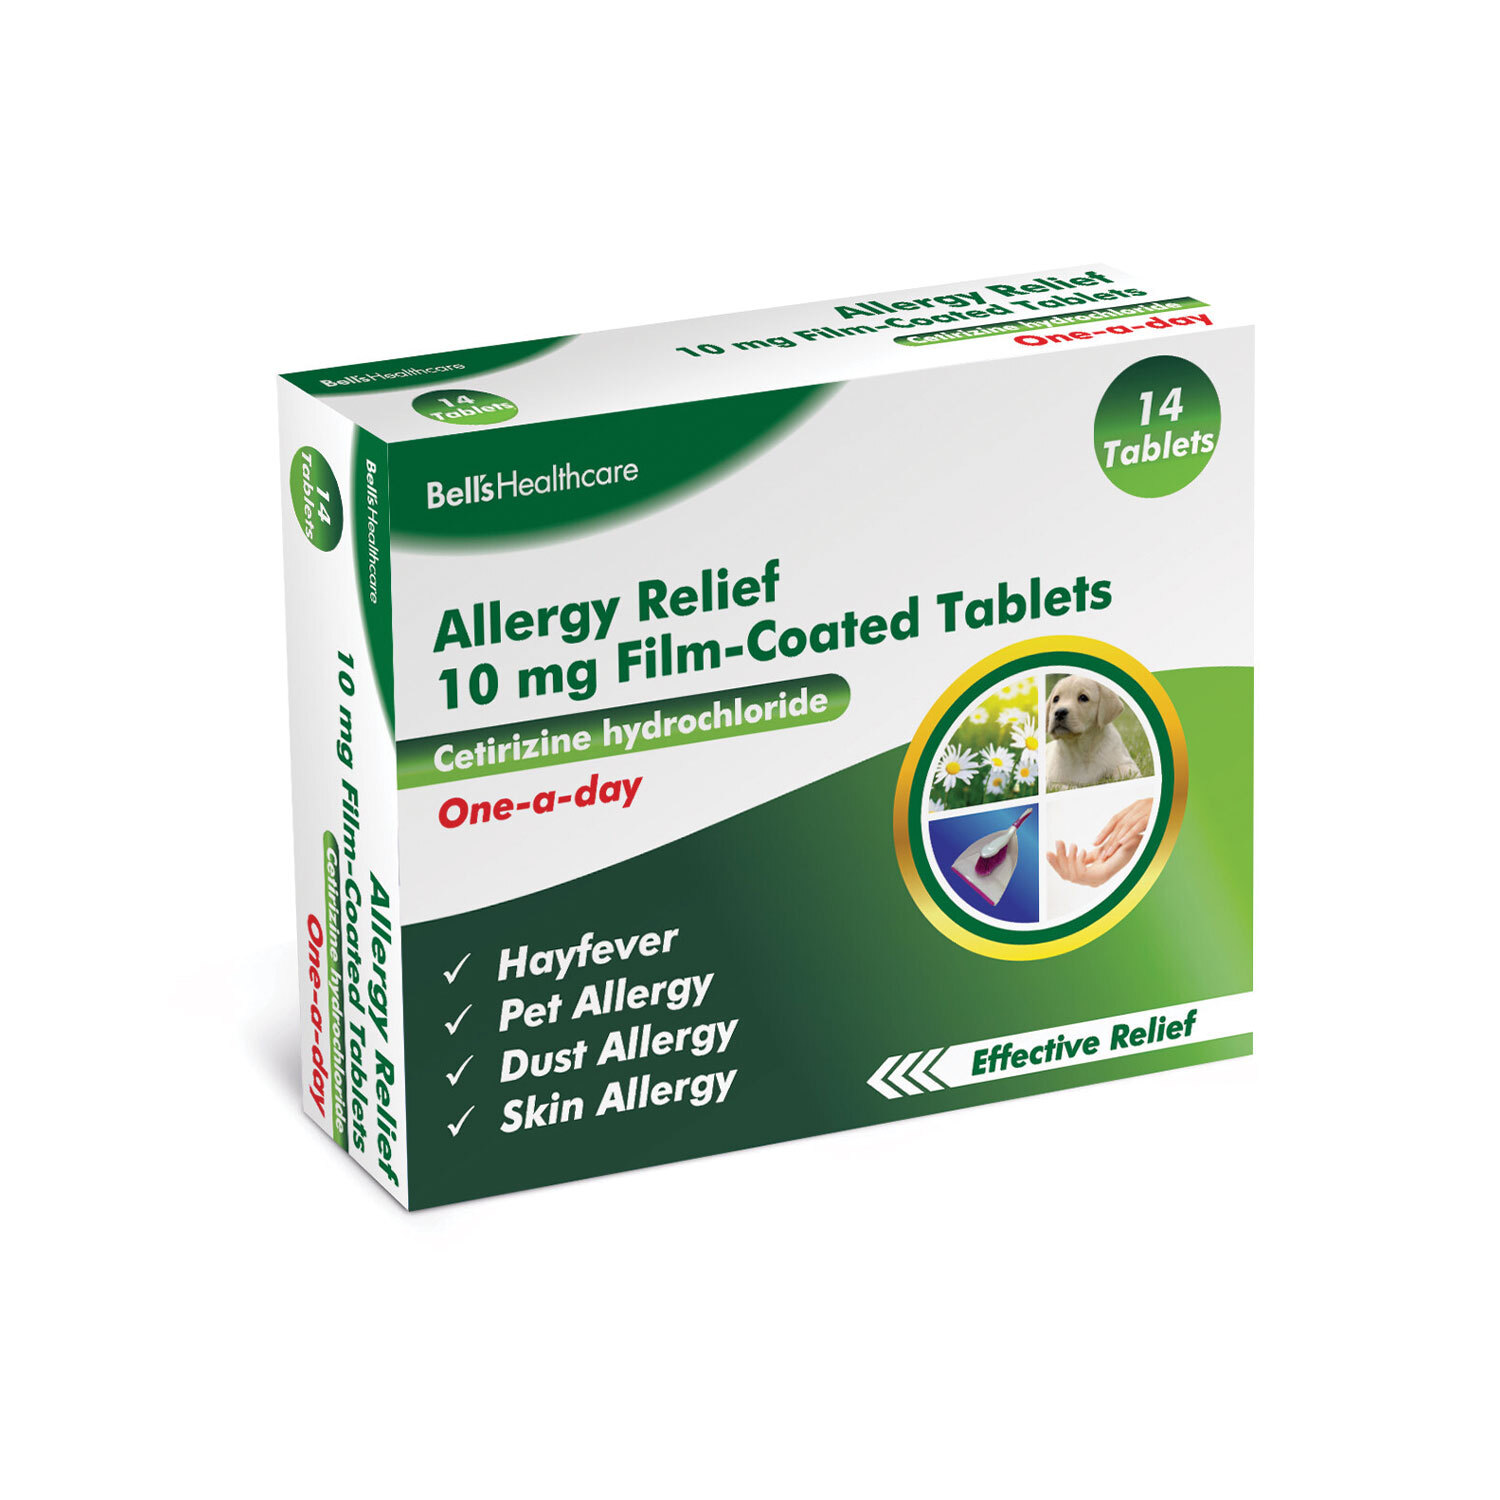 Bell's Healthcare Allergy Relief - 14 Image